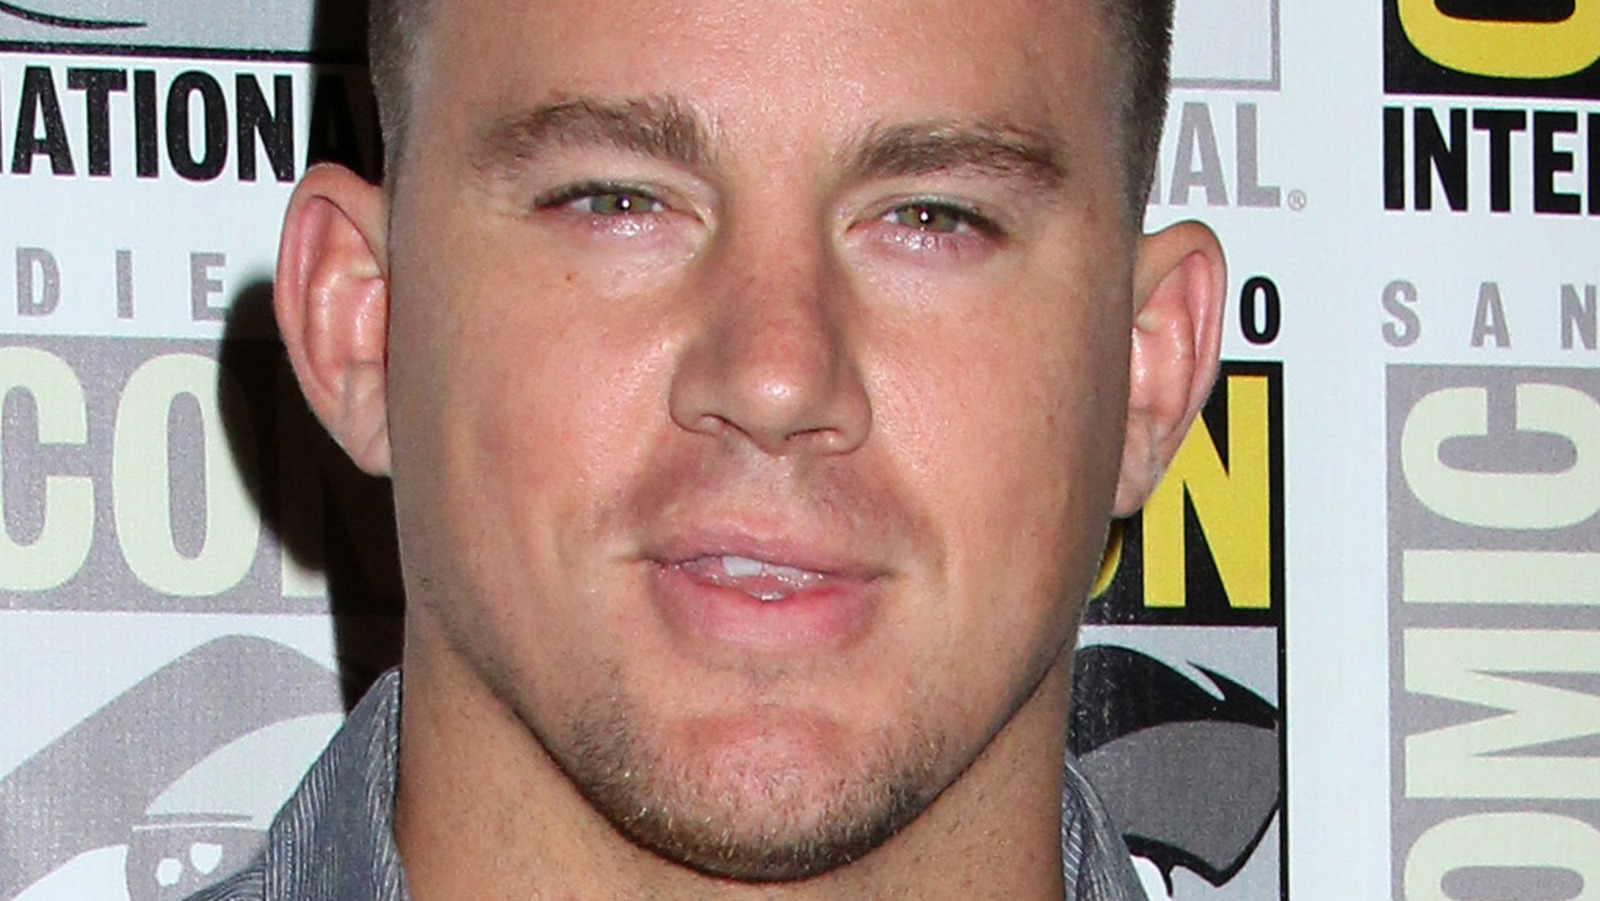 The One Tragedy That Changed Channing Tatum Forever